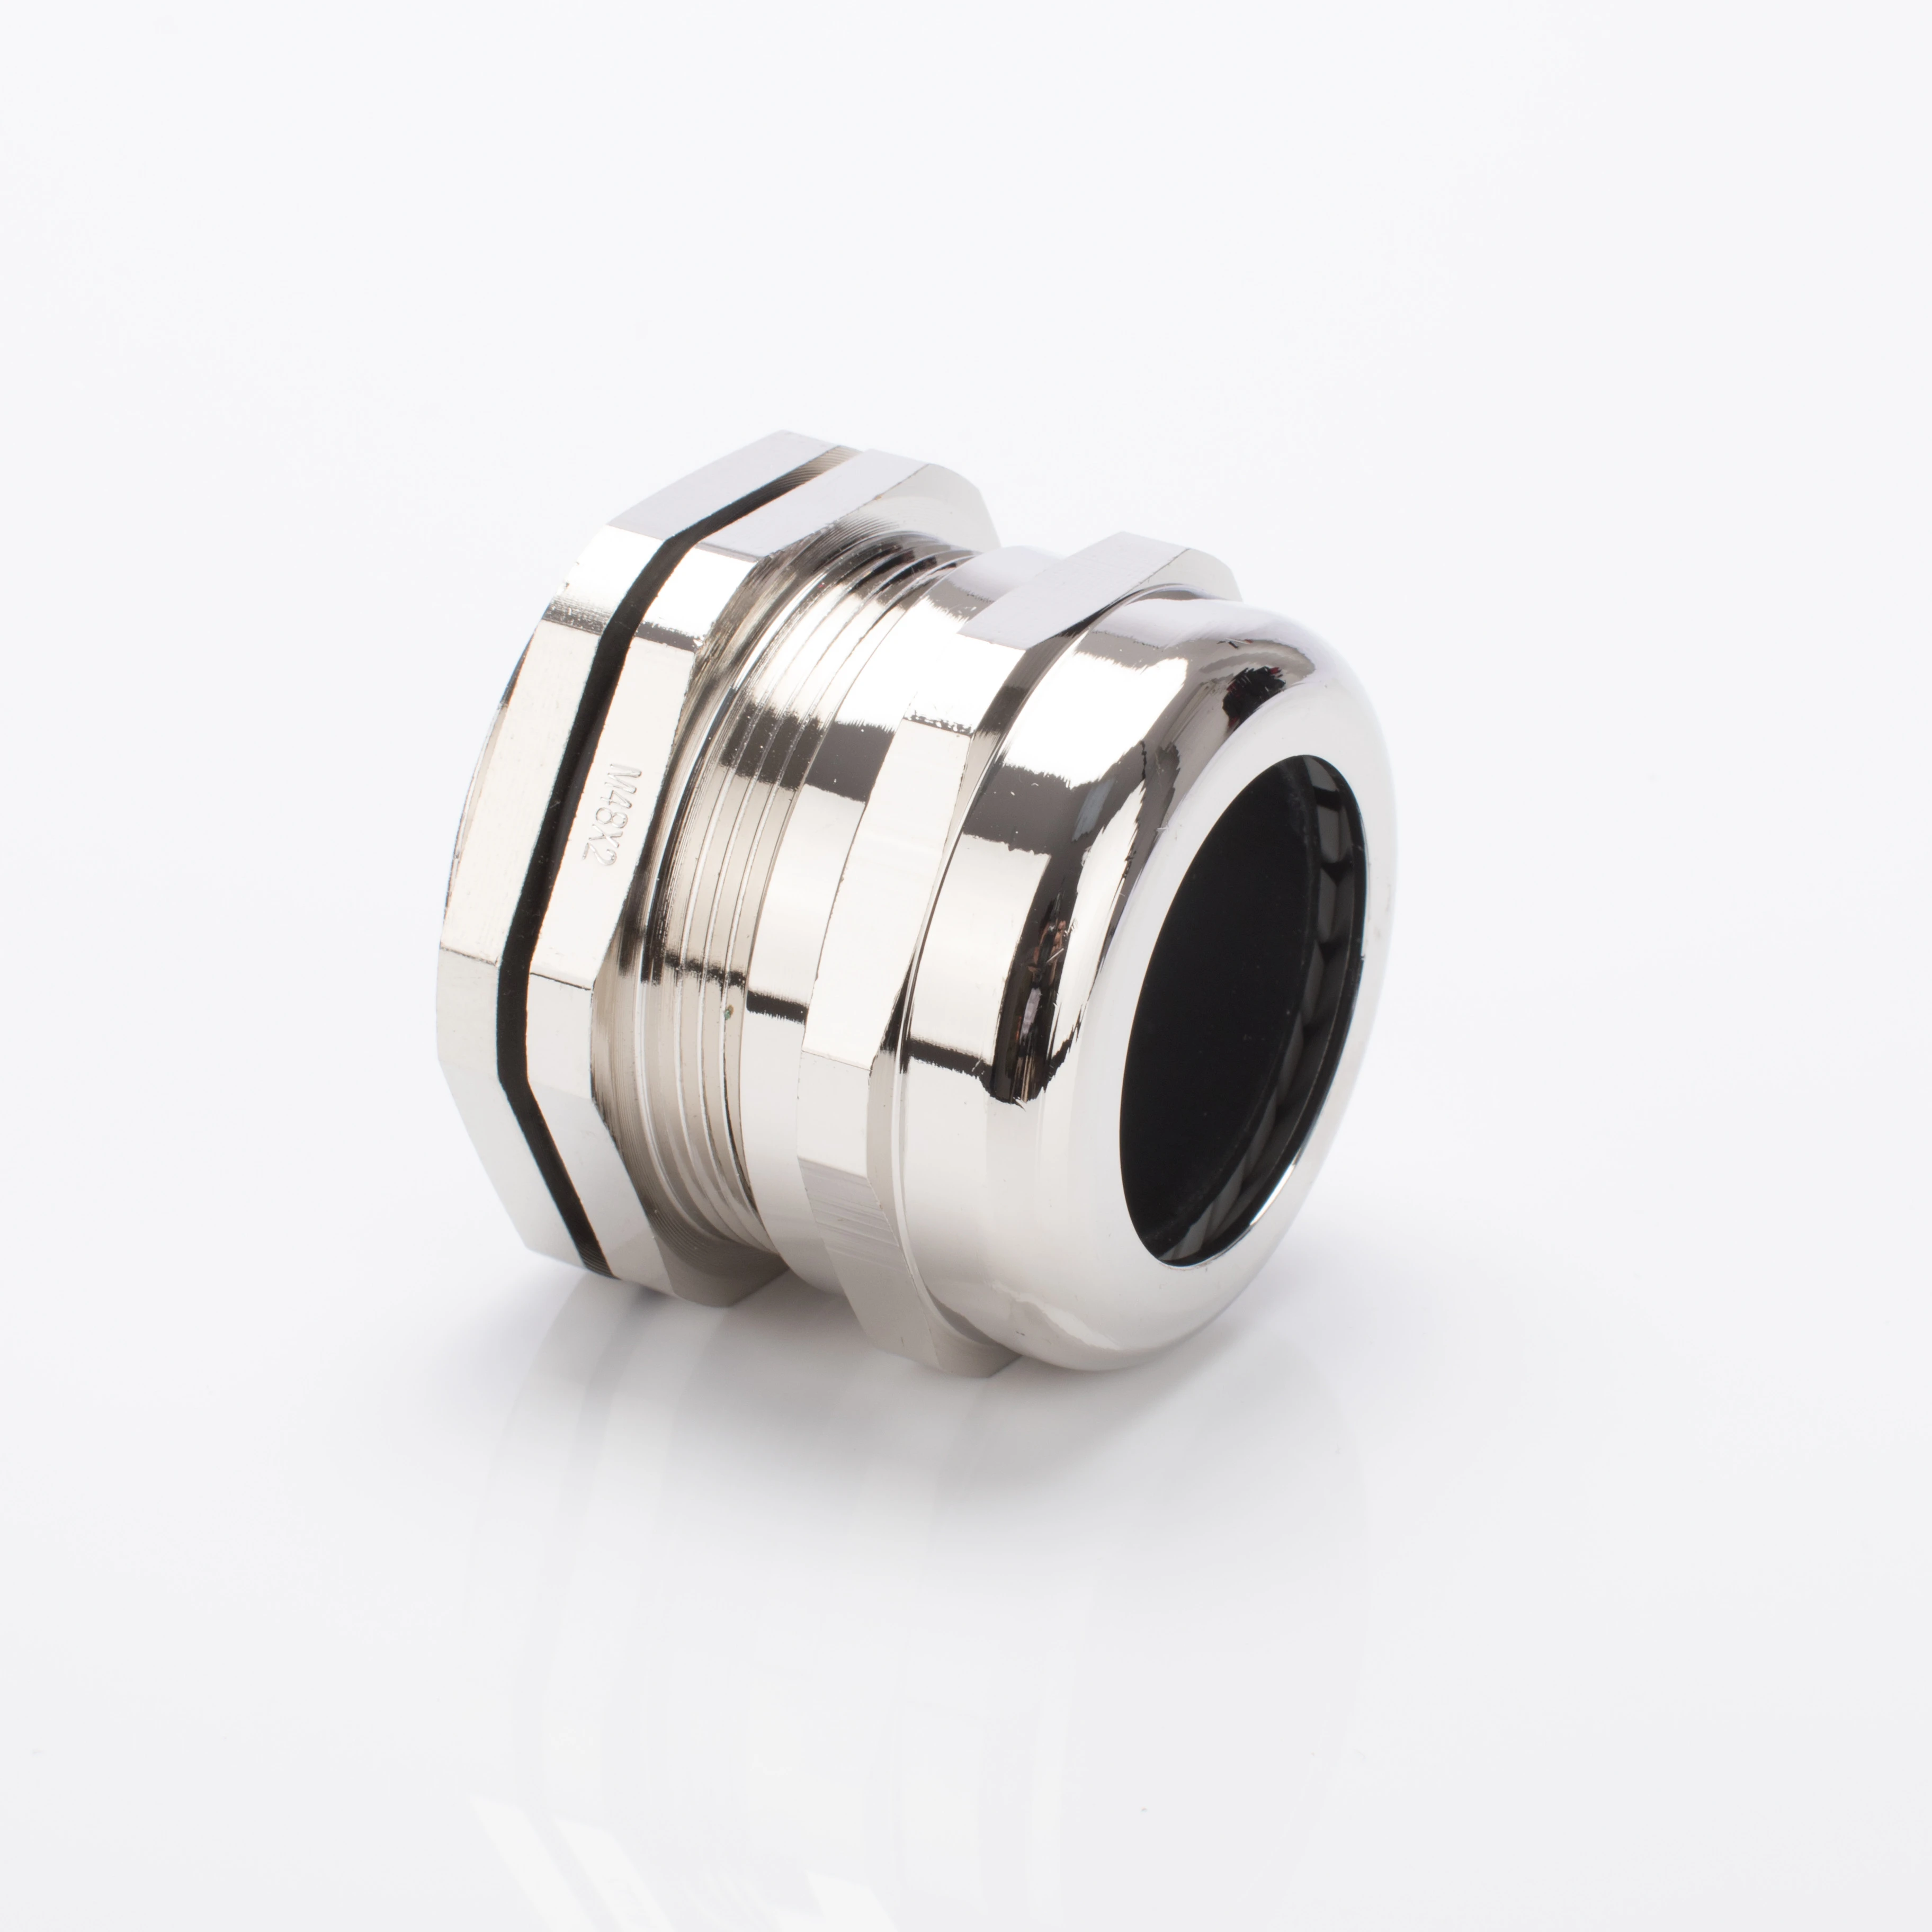 EASCO Mechanical Cable Entry Brass Cable Gland